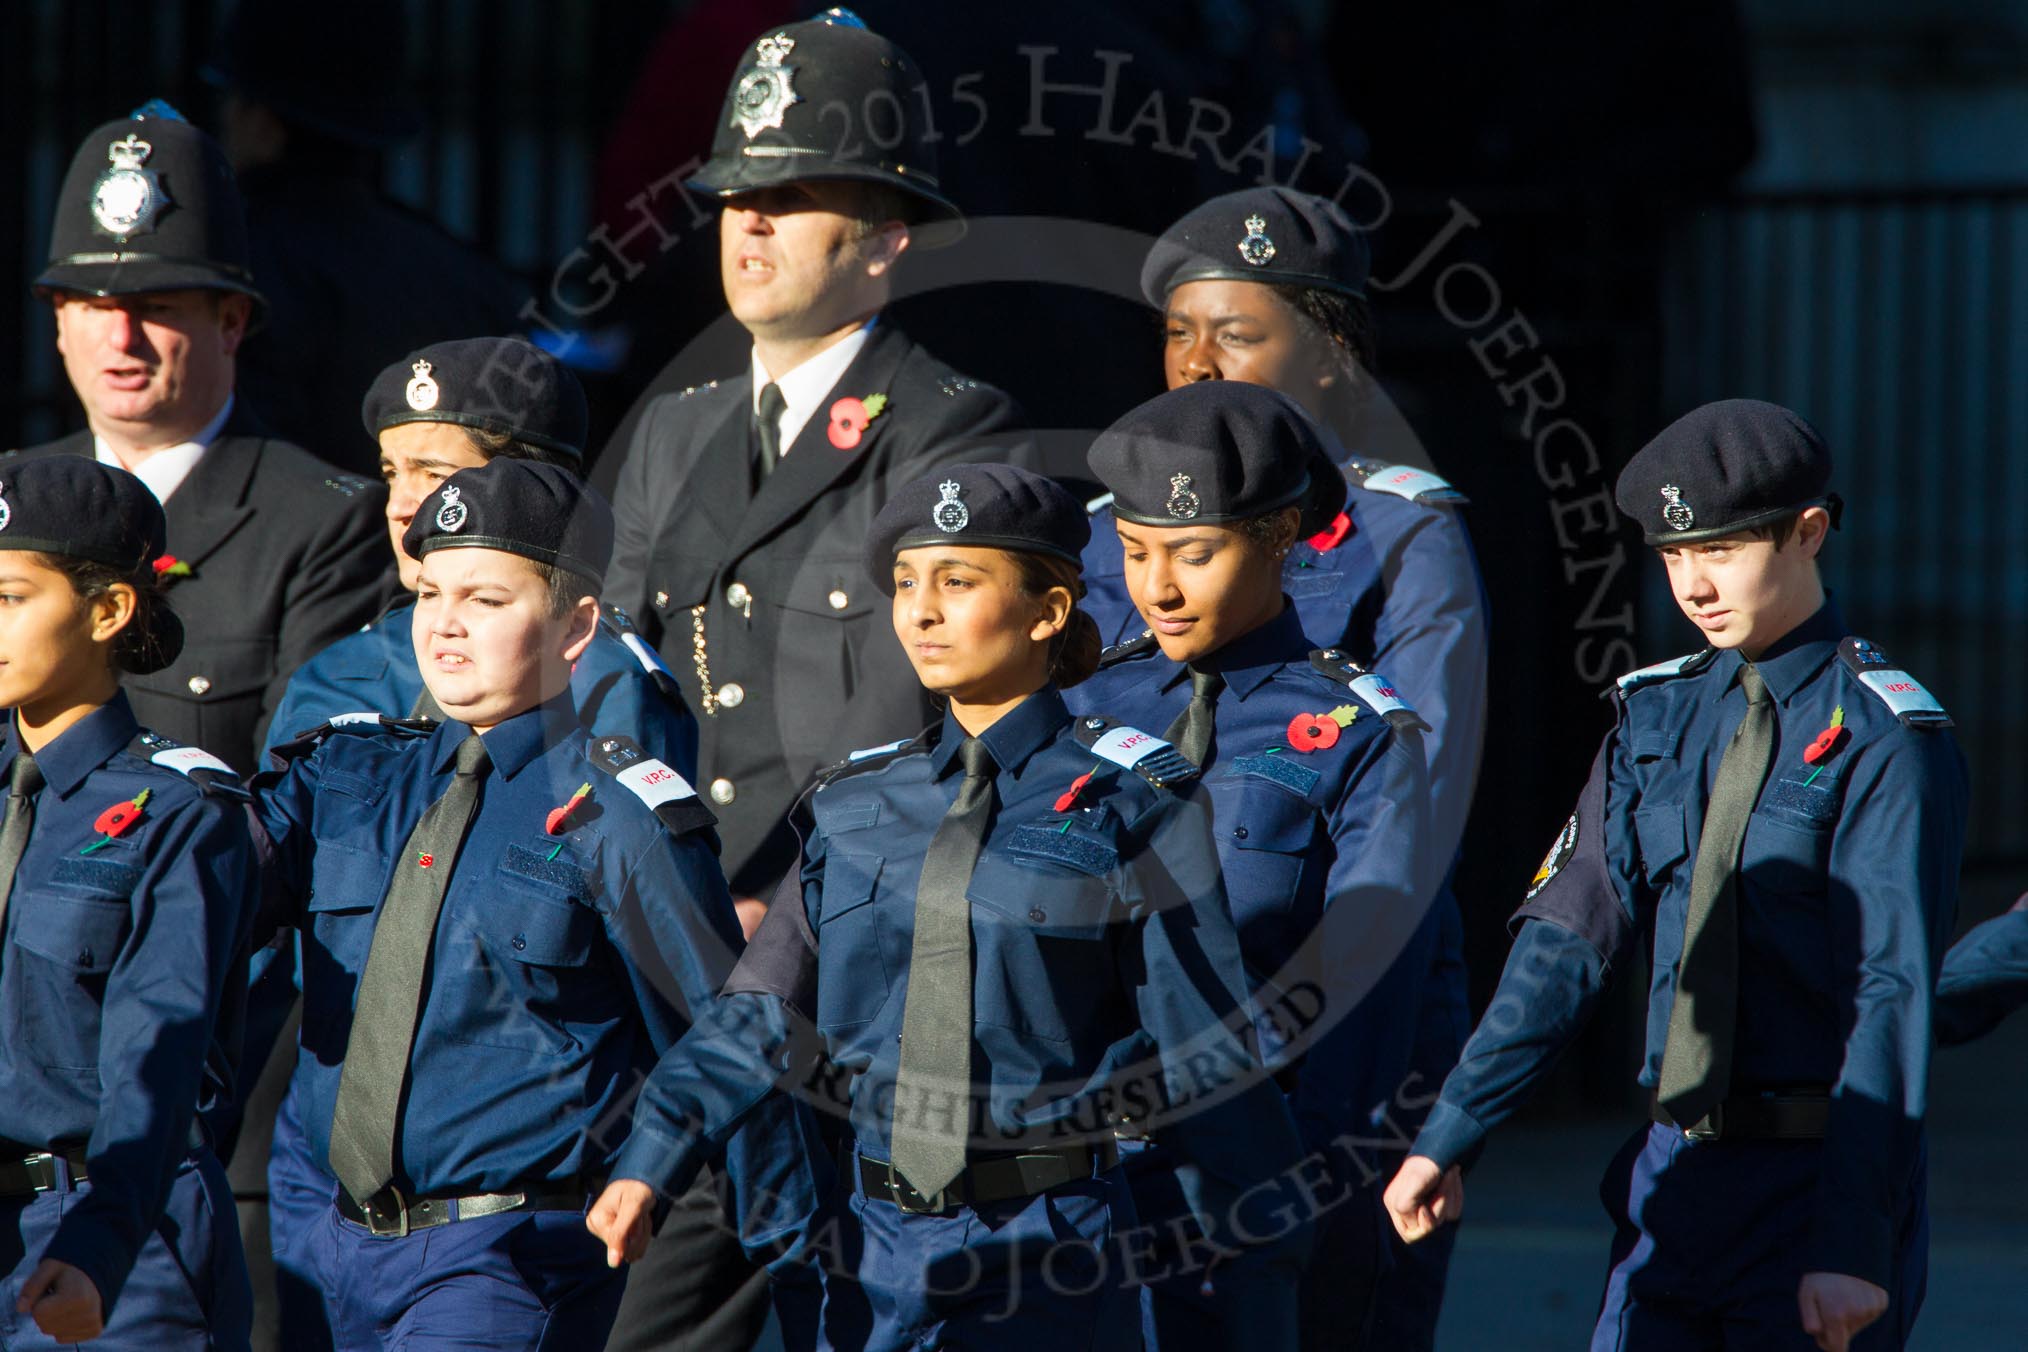 Remembrance Sunday Cenotaph March Past 2013: M54 - Metropolitan Police Volunteer Police Cadets..
Press stand opposite the Foreign Office building, Whitehall, London SW1,
London,
Greater London,
United Kingdom,
on 10 November 2013 at 12:16, image #2309